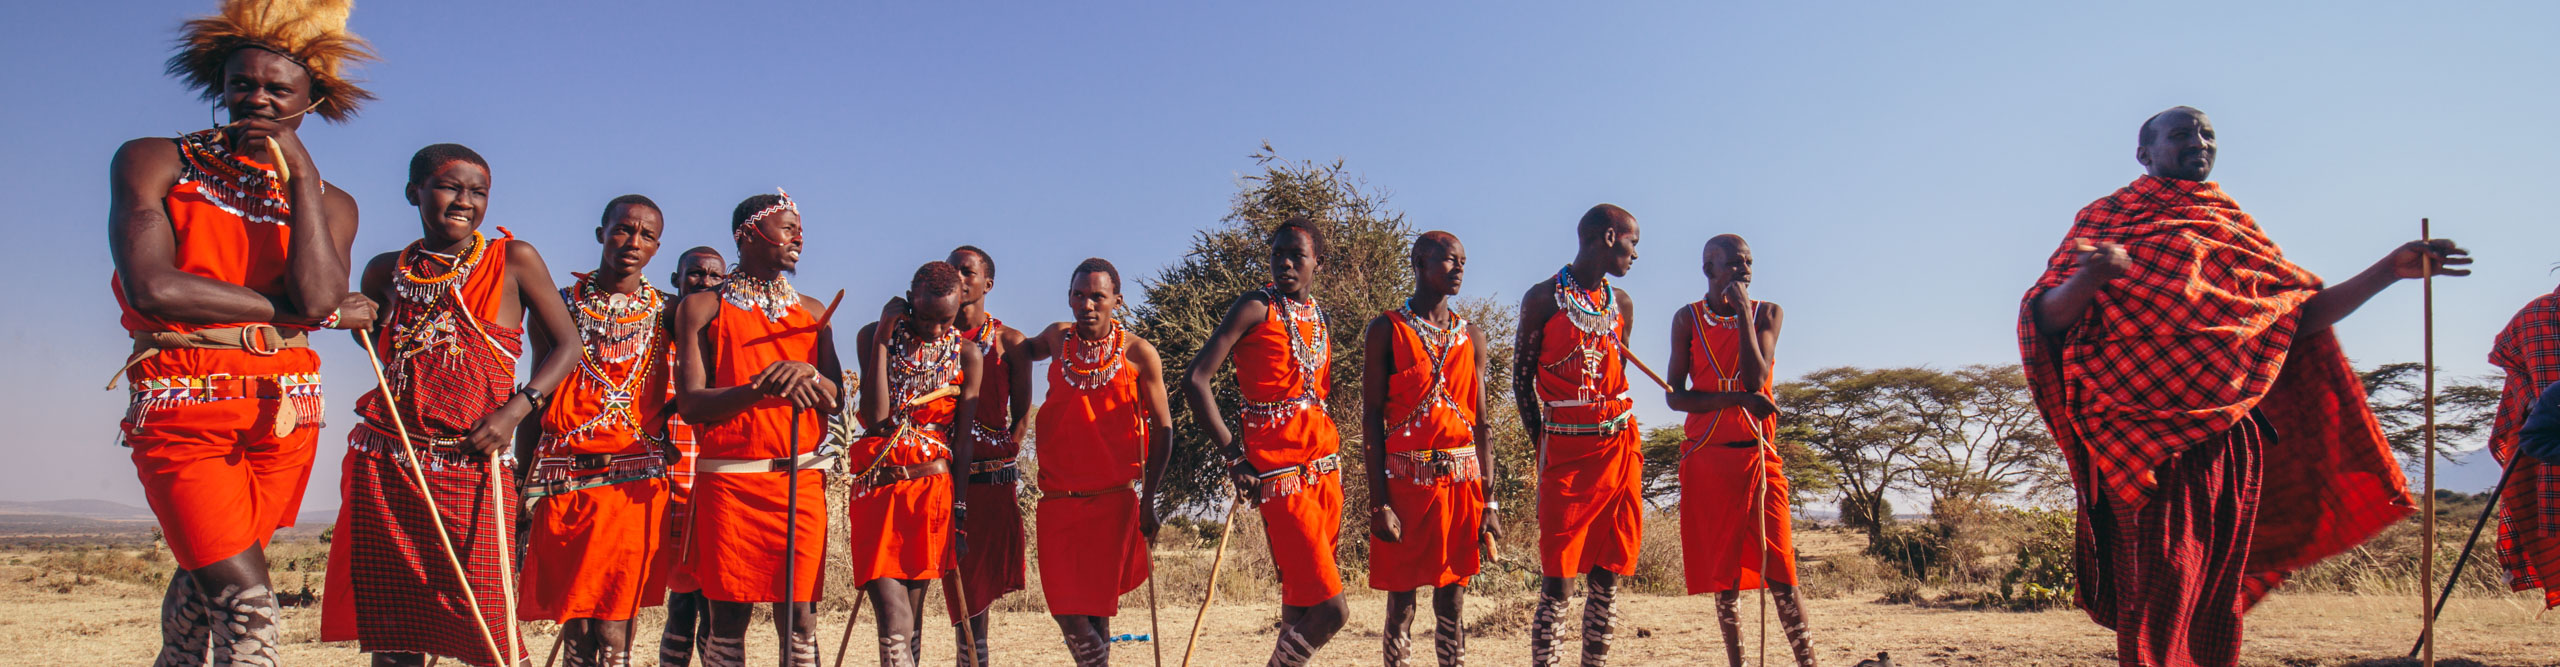 Maasai worries standing in their traditional dress in the sunshine in Kenya